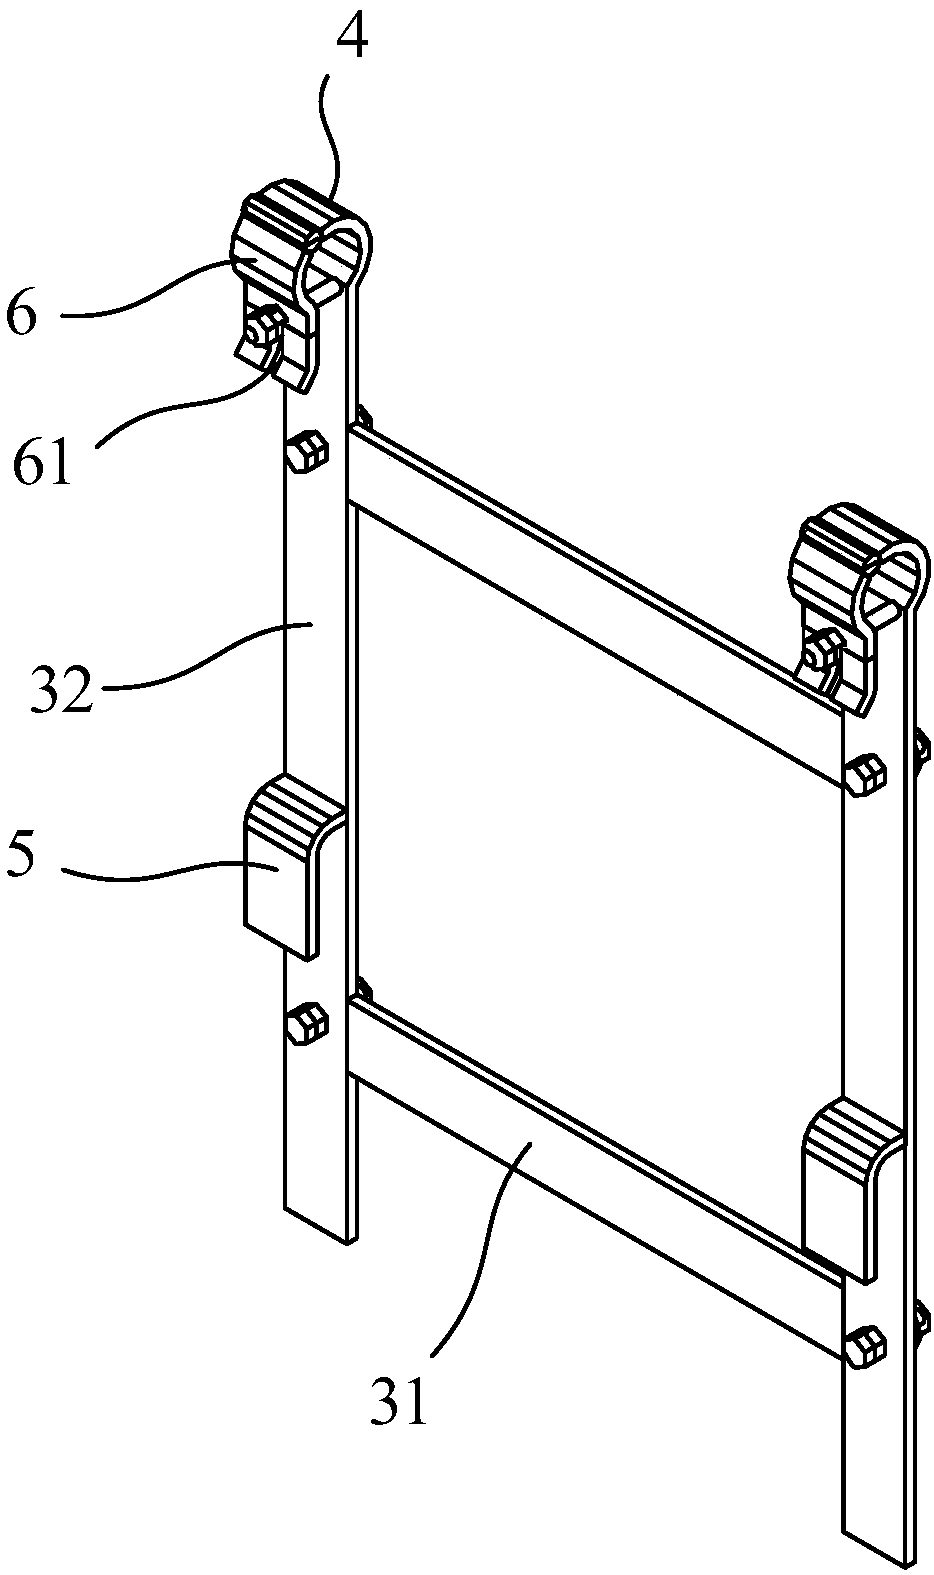 Movable hose box supporting frame